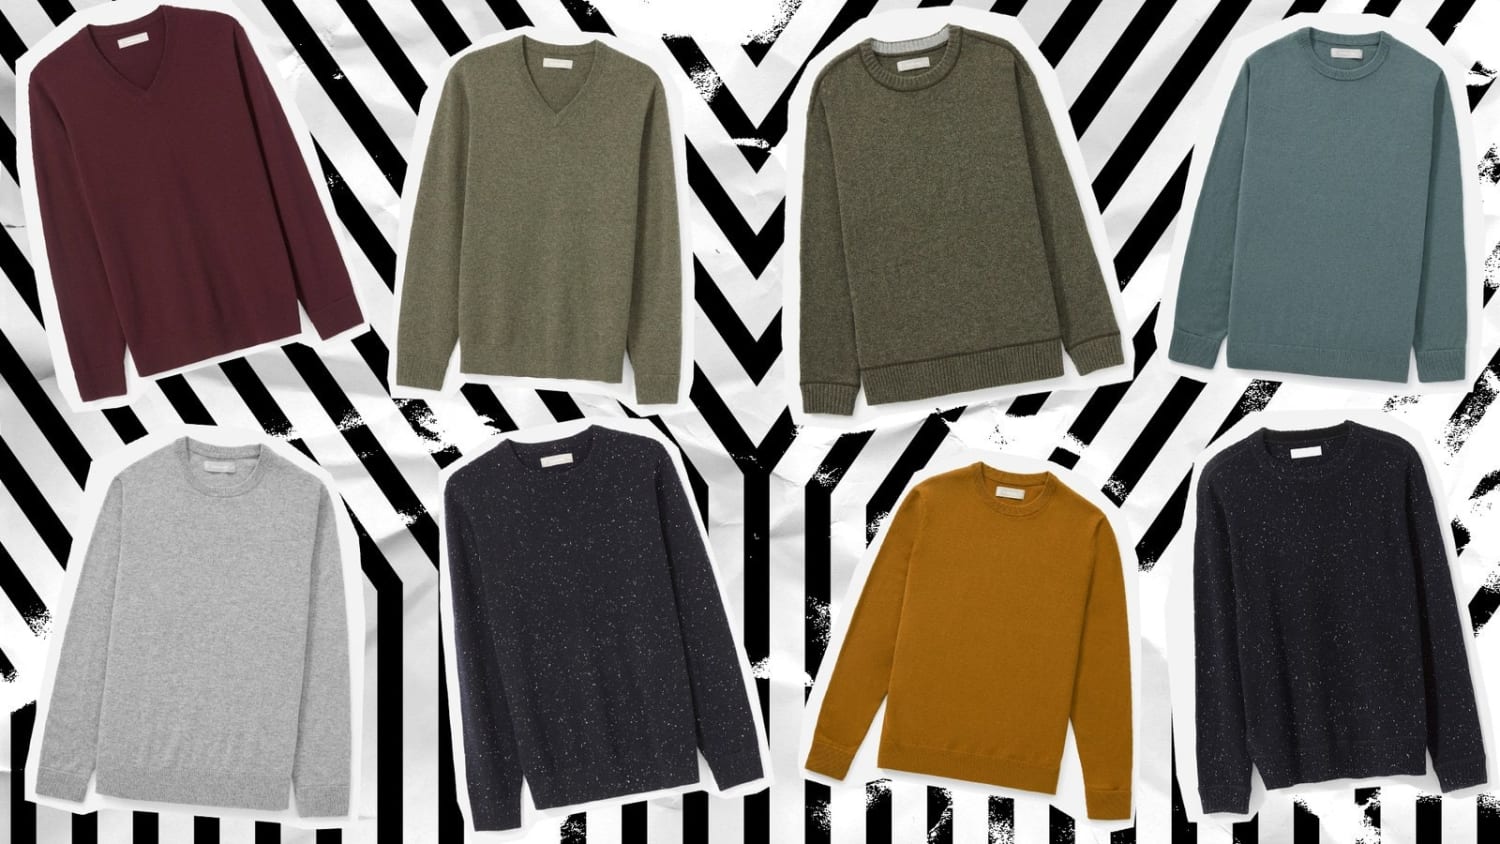 Everlane's Cashmere Sweaters Are All $100 Right Now